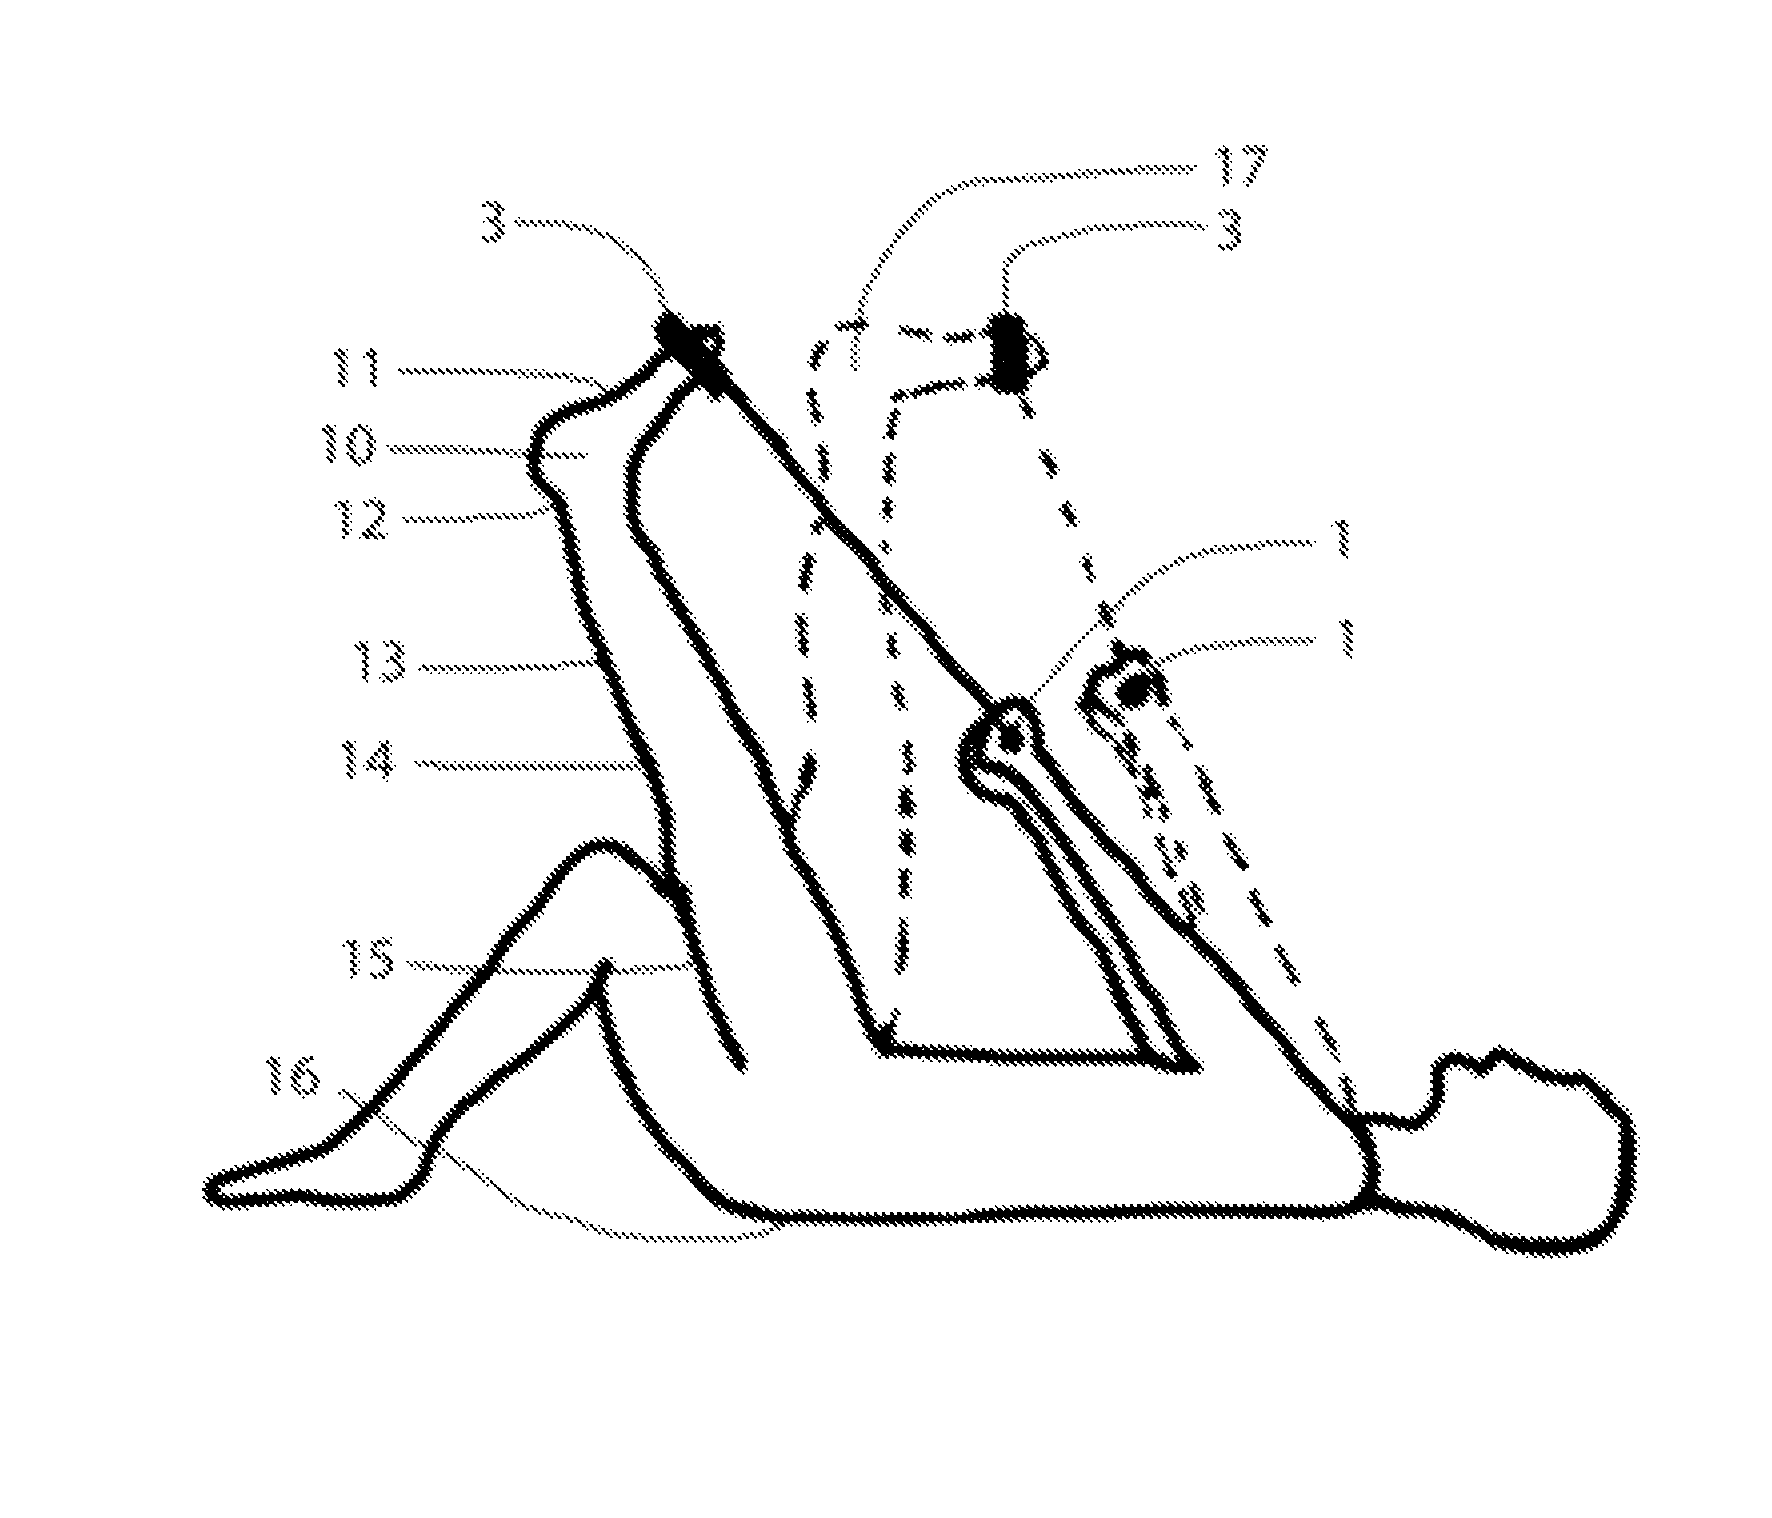 Handheld extremity flexibility evaluation and treatment device